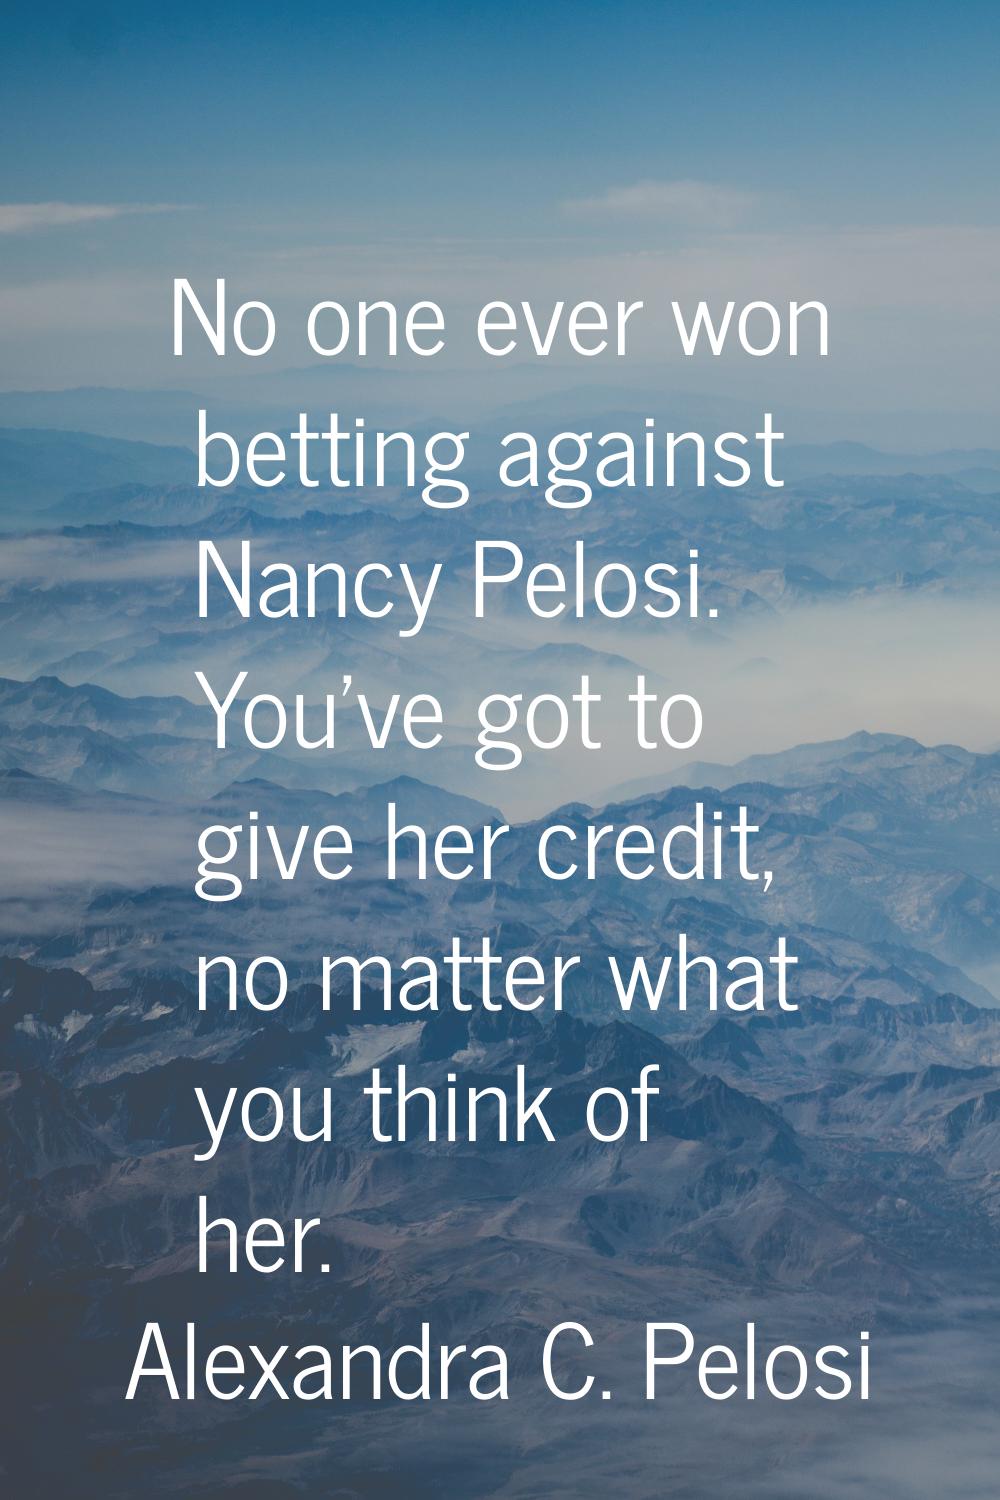 No one ever won betting against Nancy Pelosi. You've got to give her credit, no matter what you thi